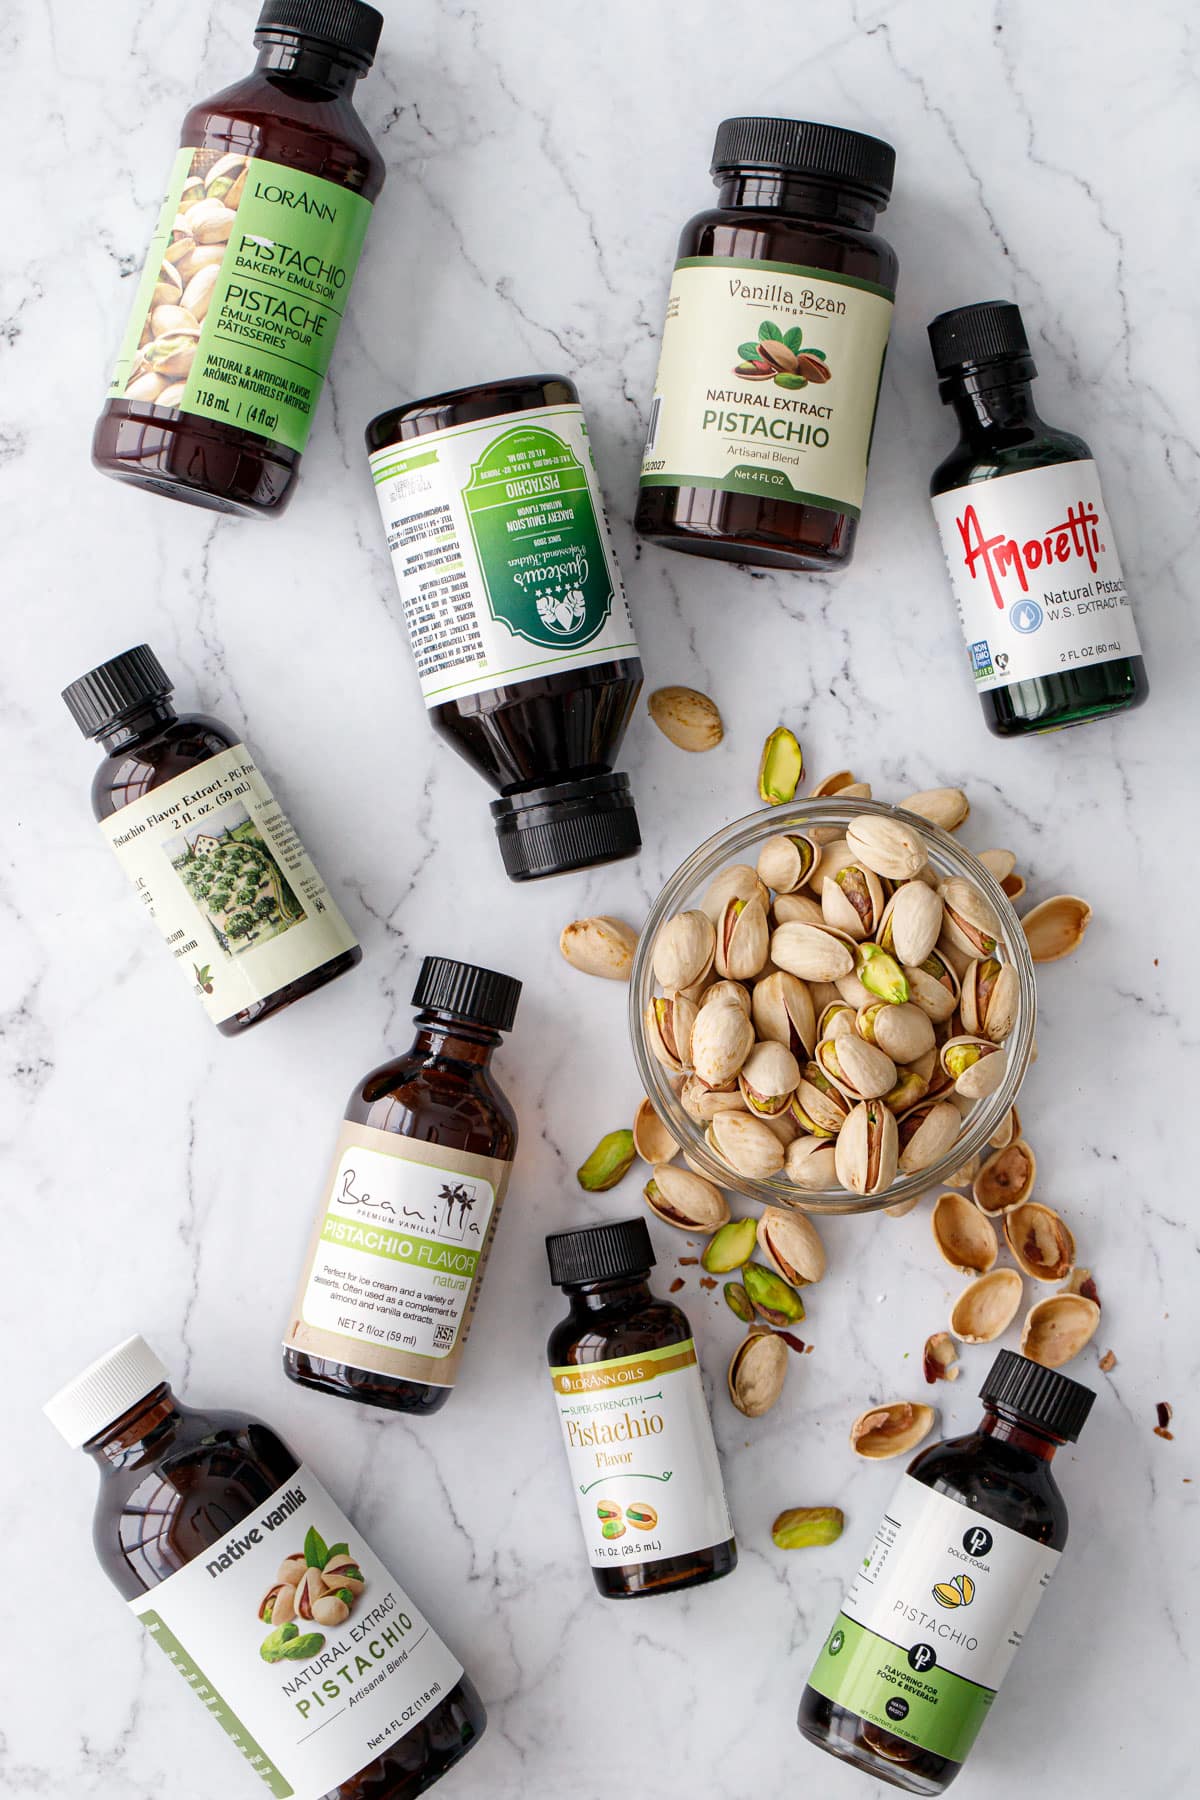 Nine bottles of different brands of pistachio extract, flat lay on a marble background with a bowl of pistachios.